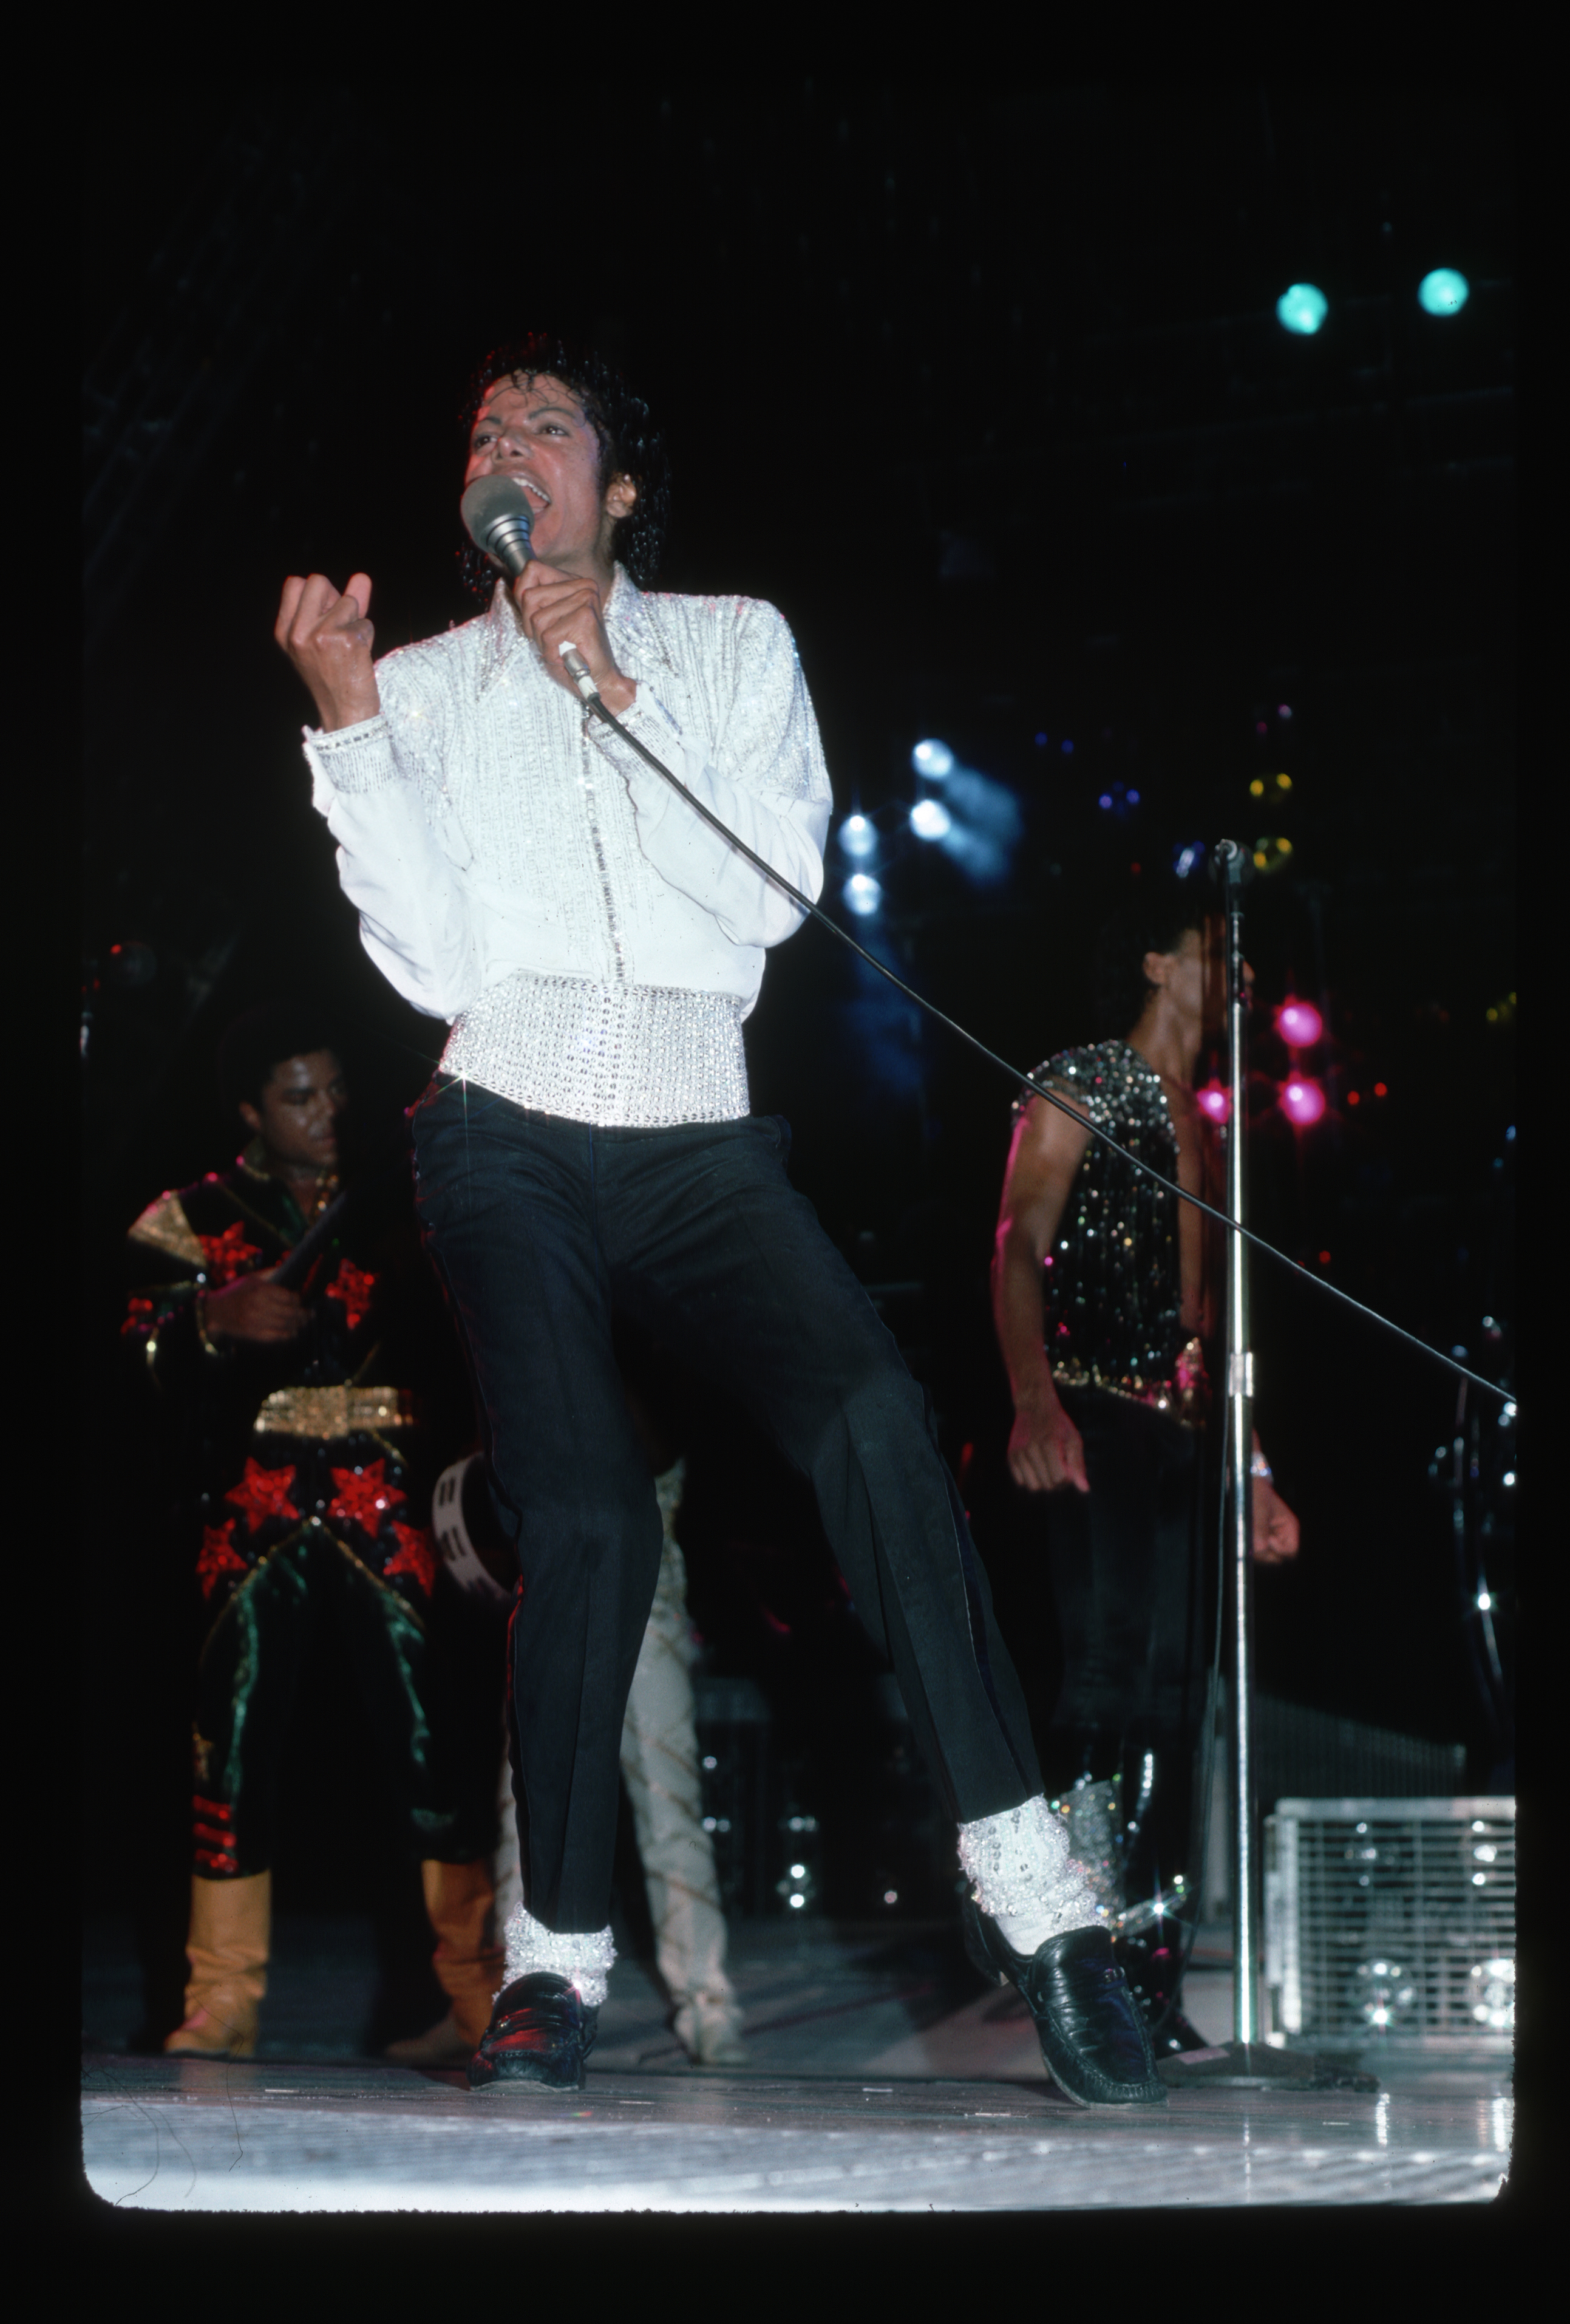 Michael Jackson performs on stage sporting a white sequined shirt and matching socks in 1994 | Source: Getty Images